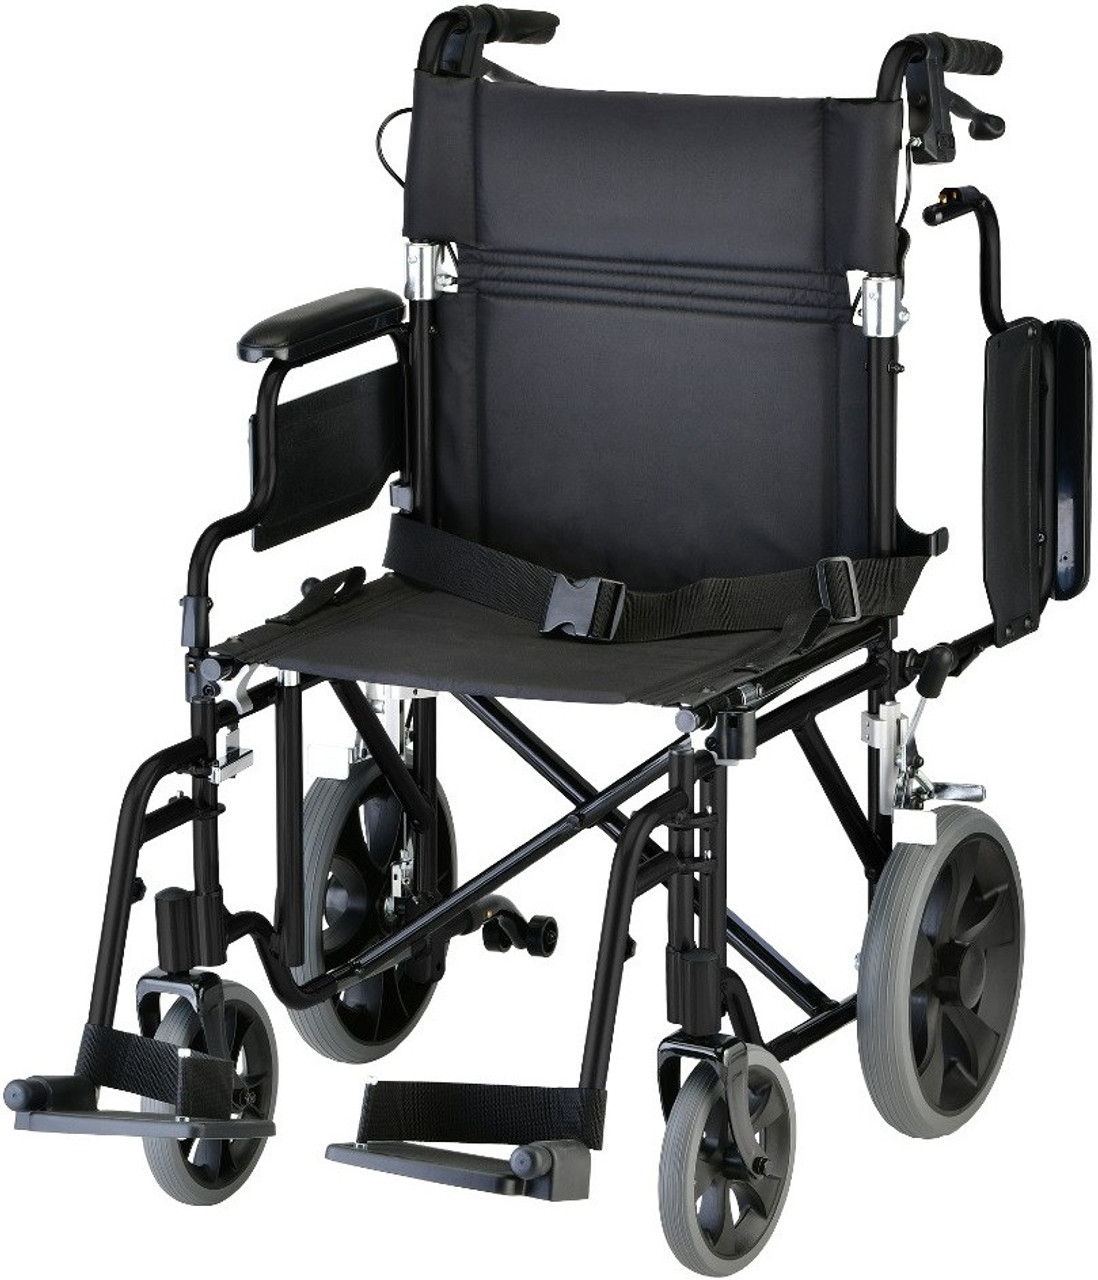  Jumbo Seat Cushion for Extra Wide Wheelchairs - 25 x